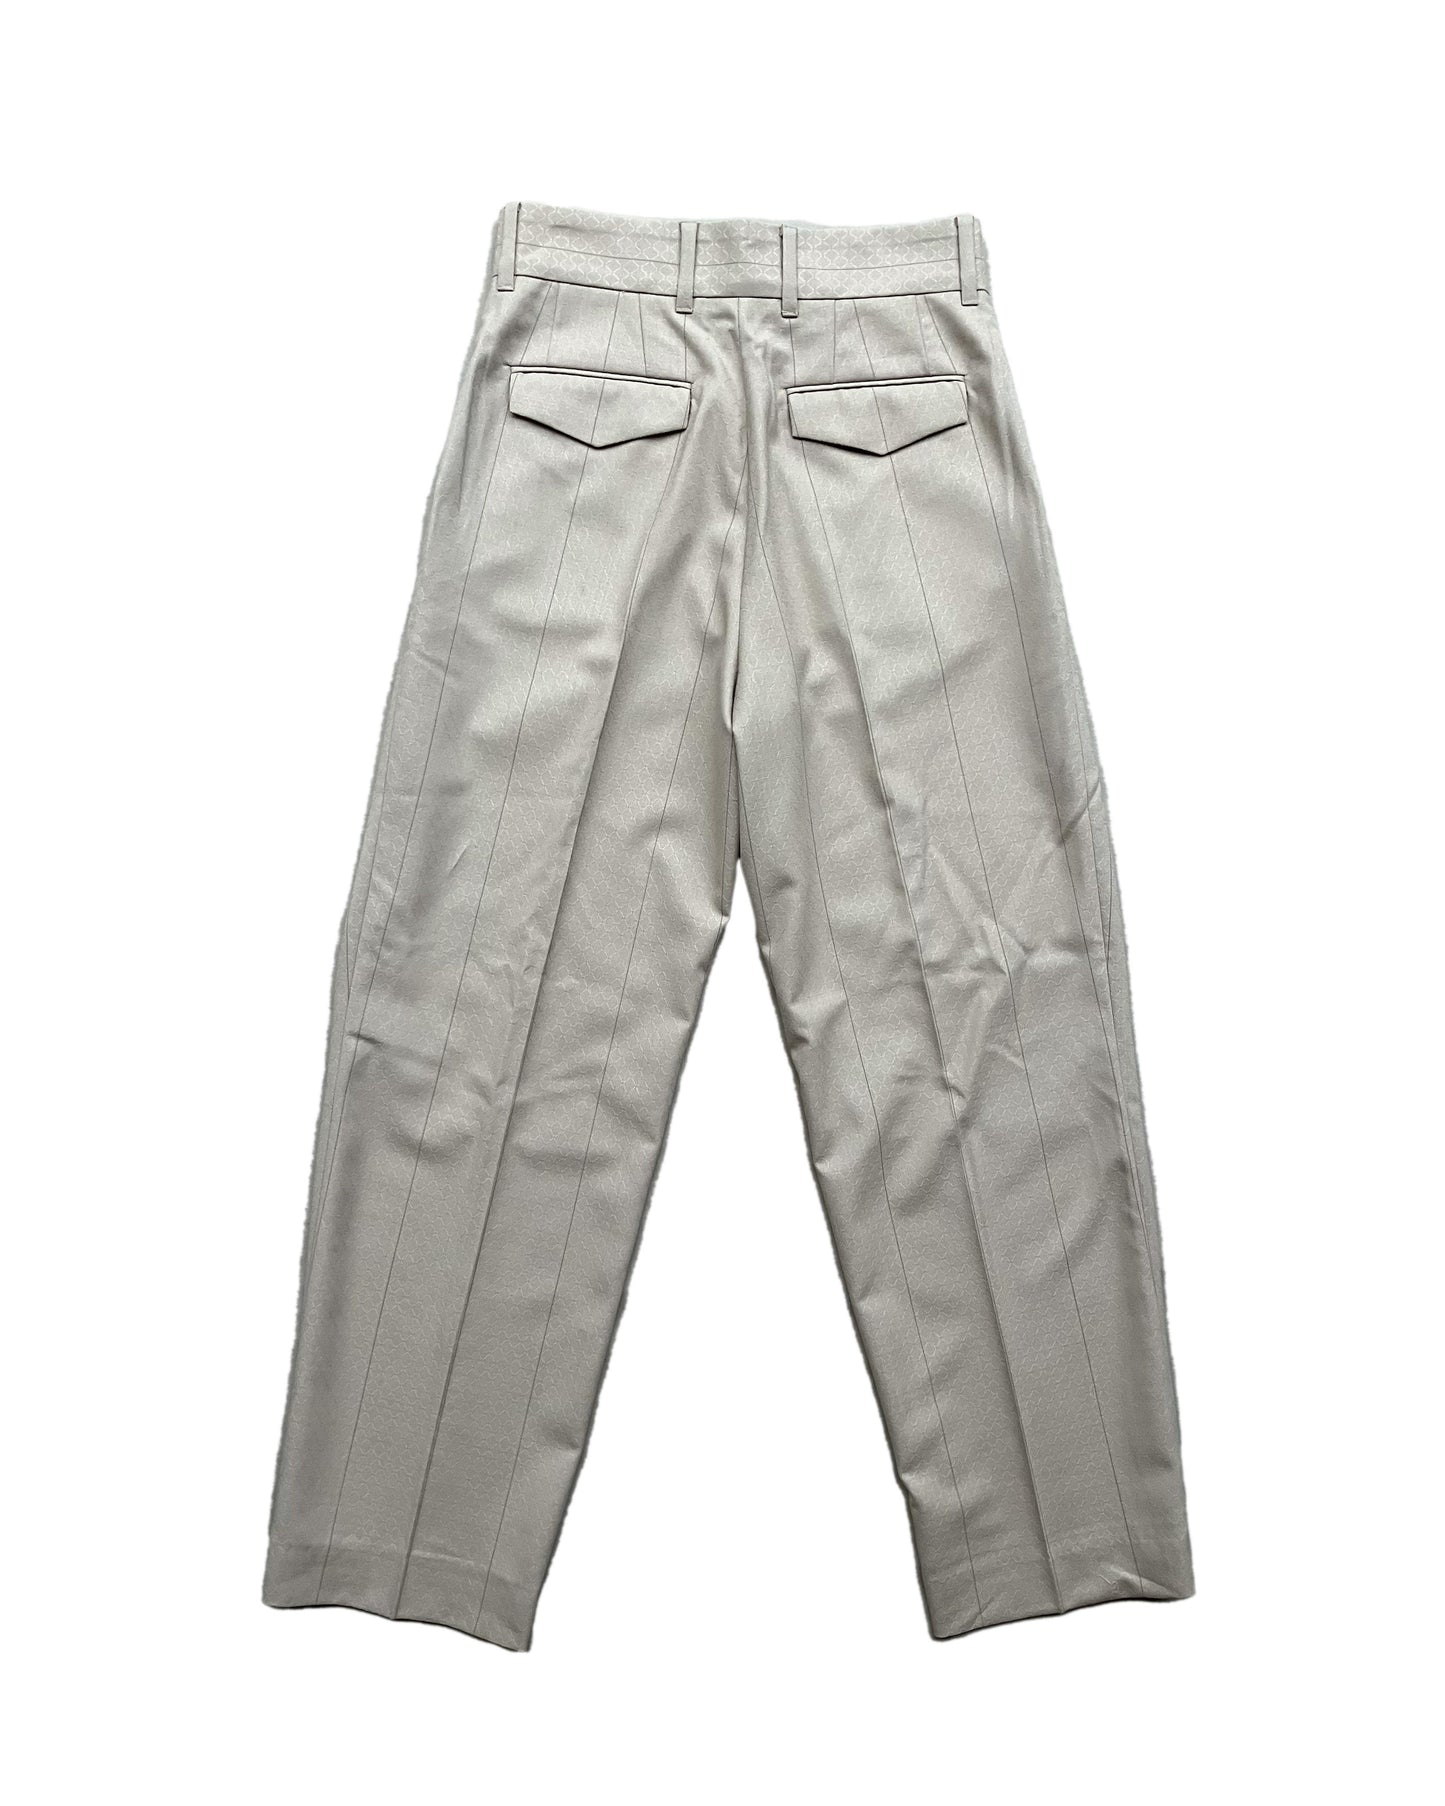 Call - CL_AW23_PT_01 / 1 TAC TROUSERS - Beige